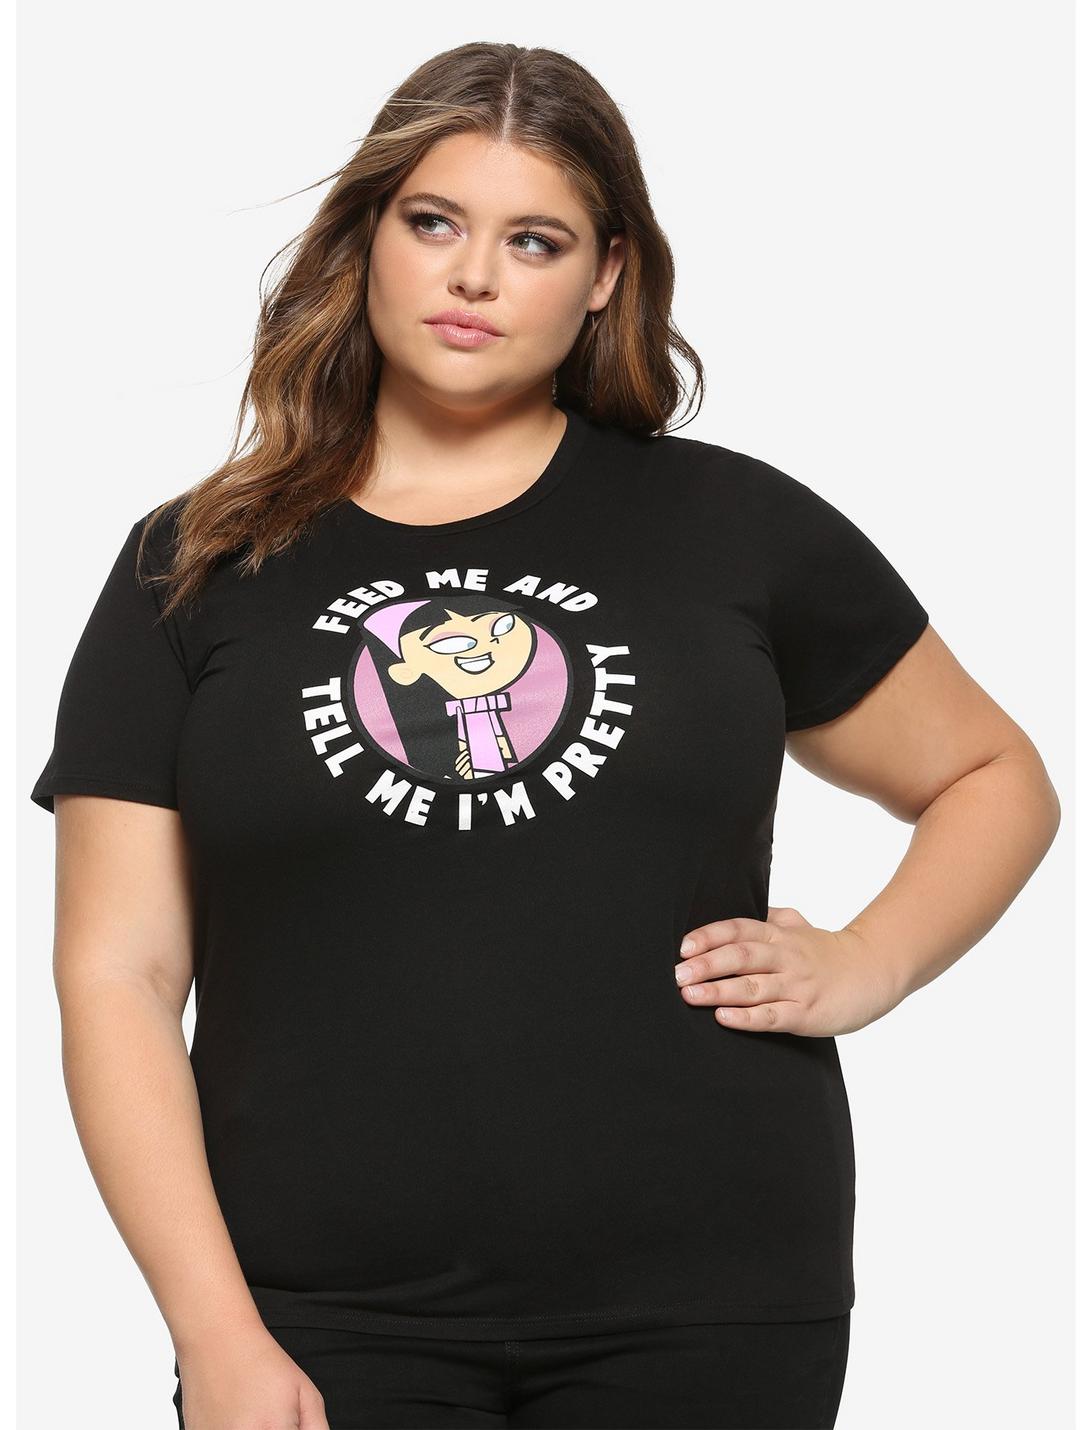 The Fairly OddParents Trixie Feed Me Girls T-Shirt Plus Size, MULTI, hi-res